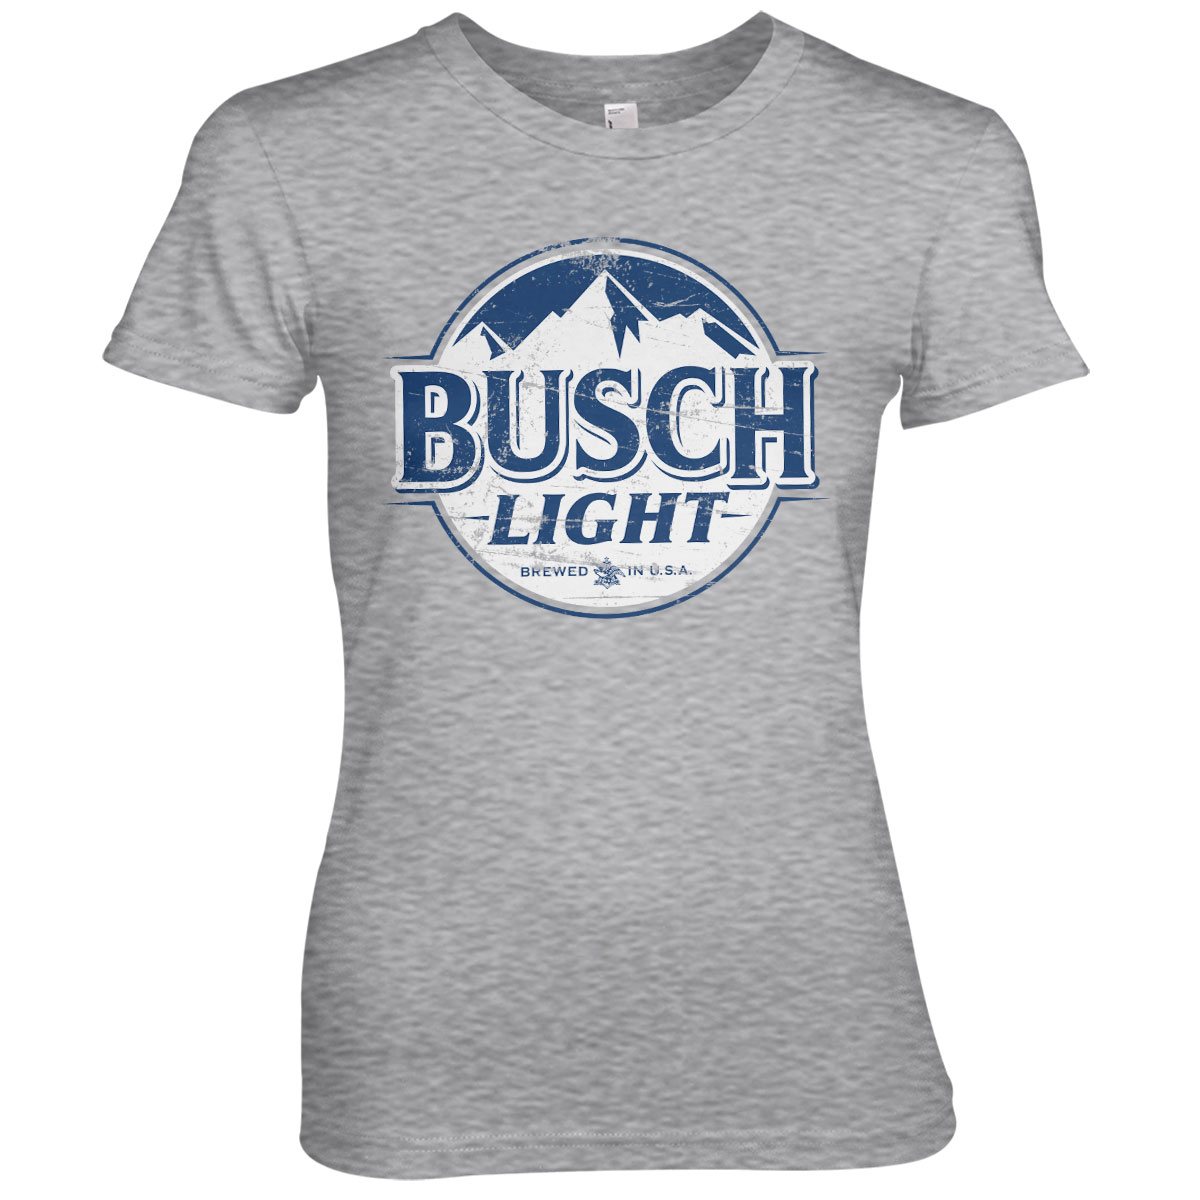 Details about   Officially Licensed Busch Beer Vintage Label Sweatshirt S-XXL Sizes